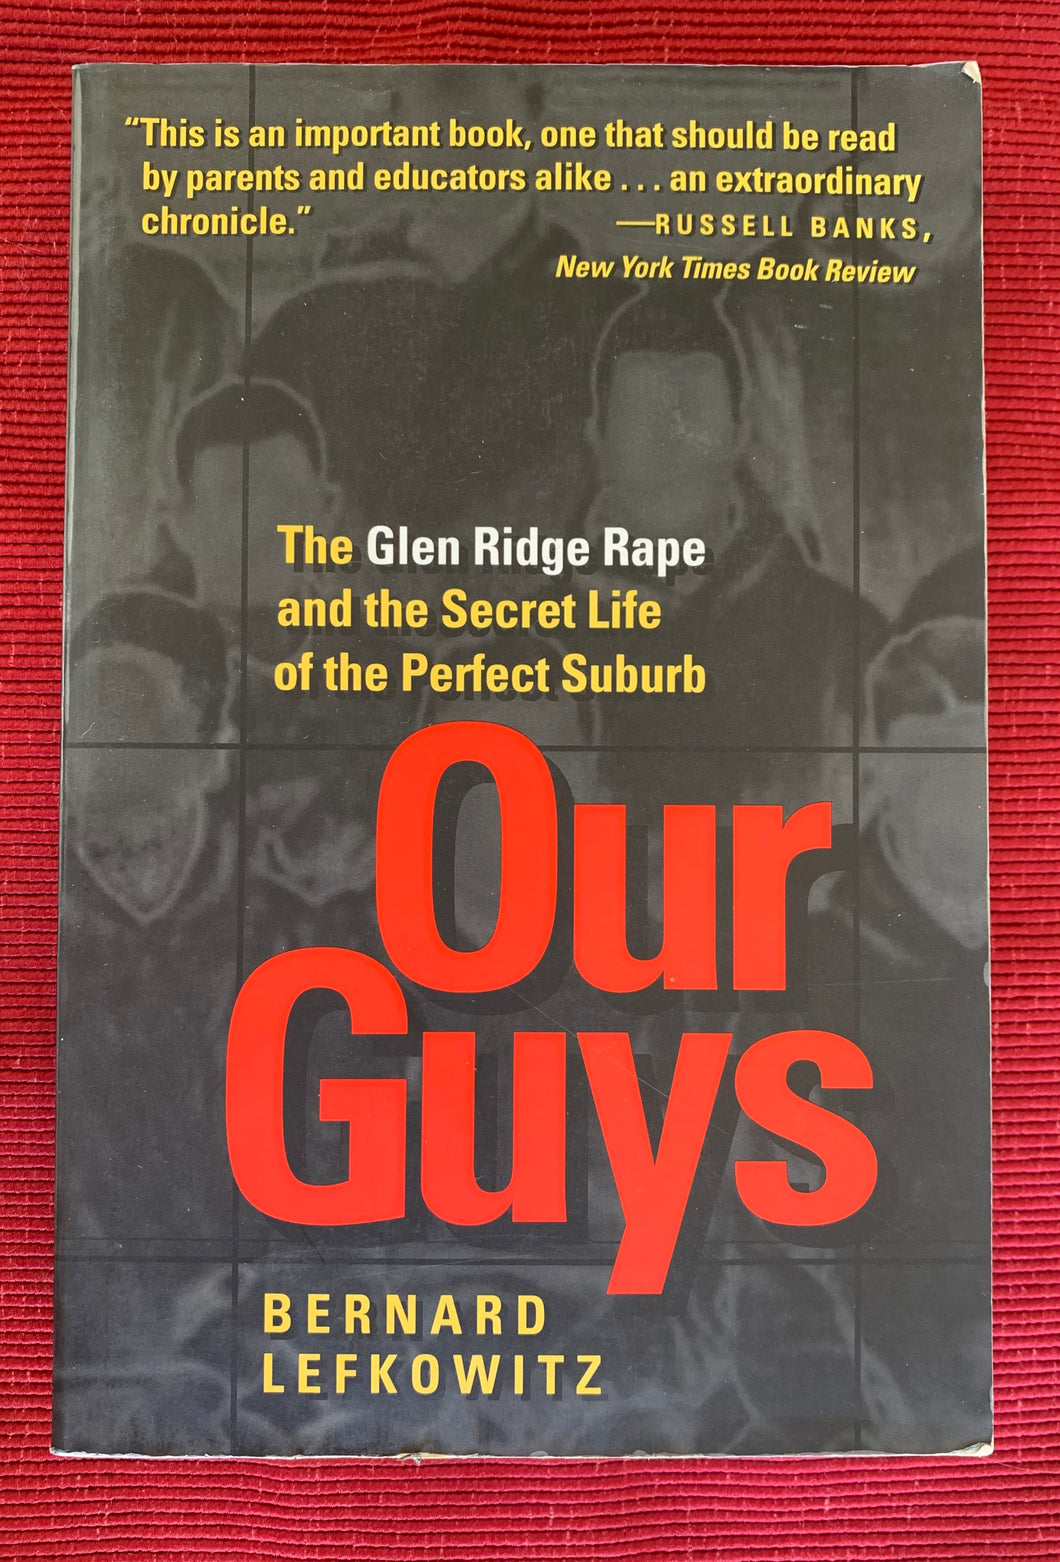 Our Guys: The Glen Ridge Rape and the Secret Life of the Perfect Suburb